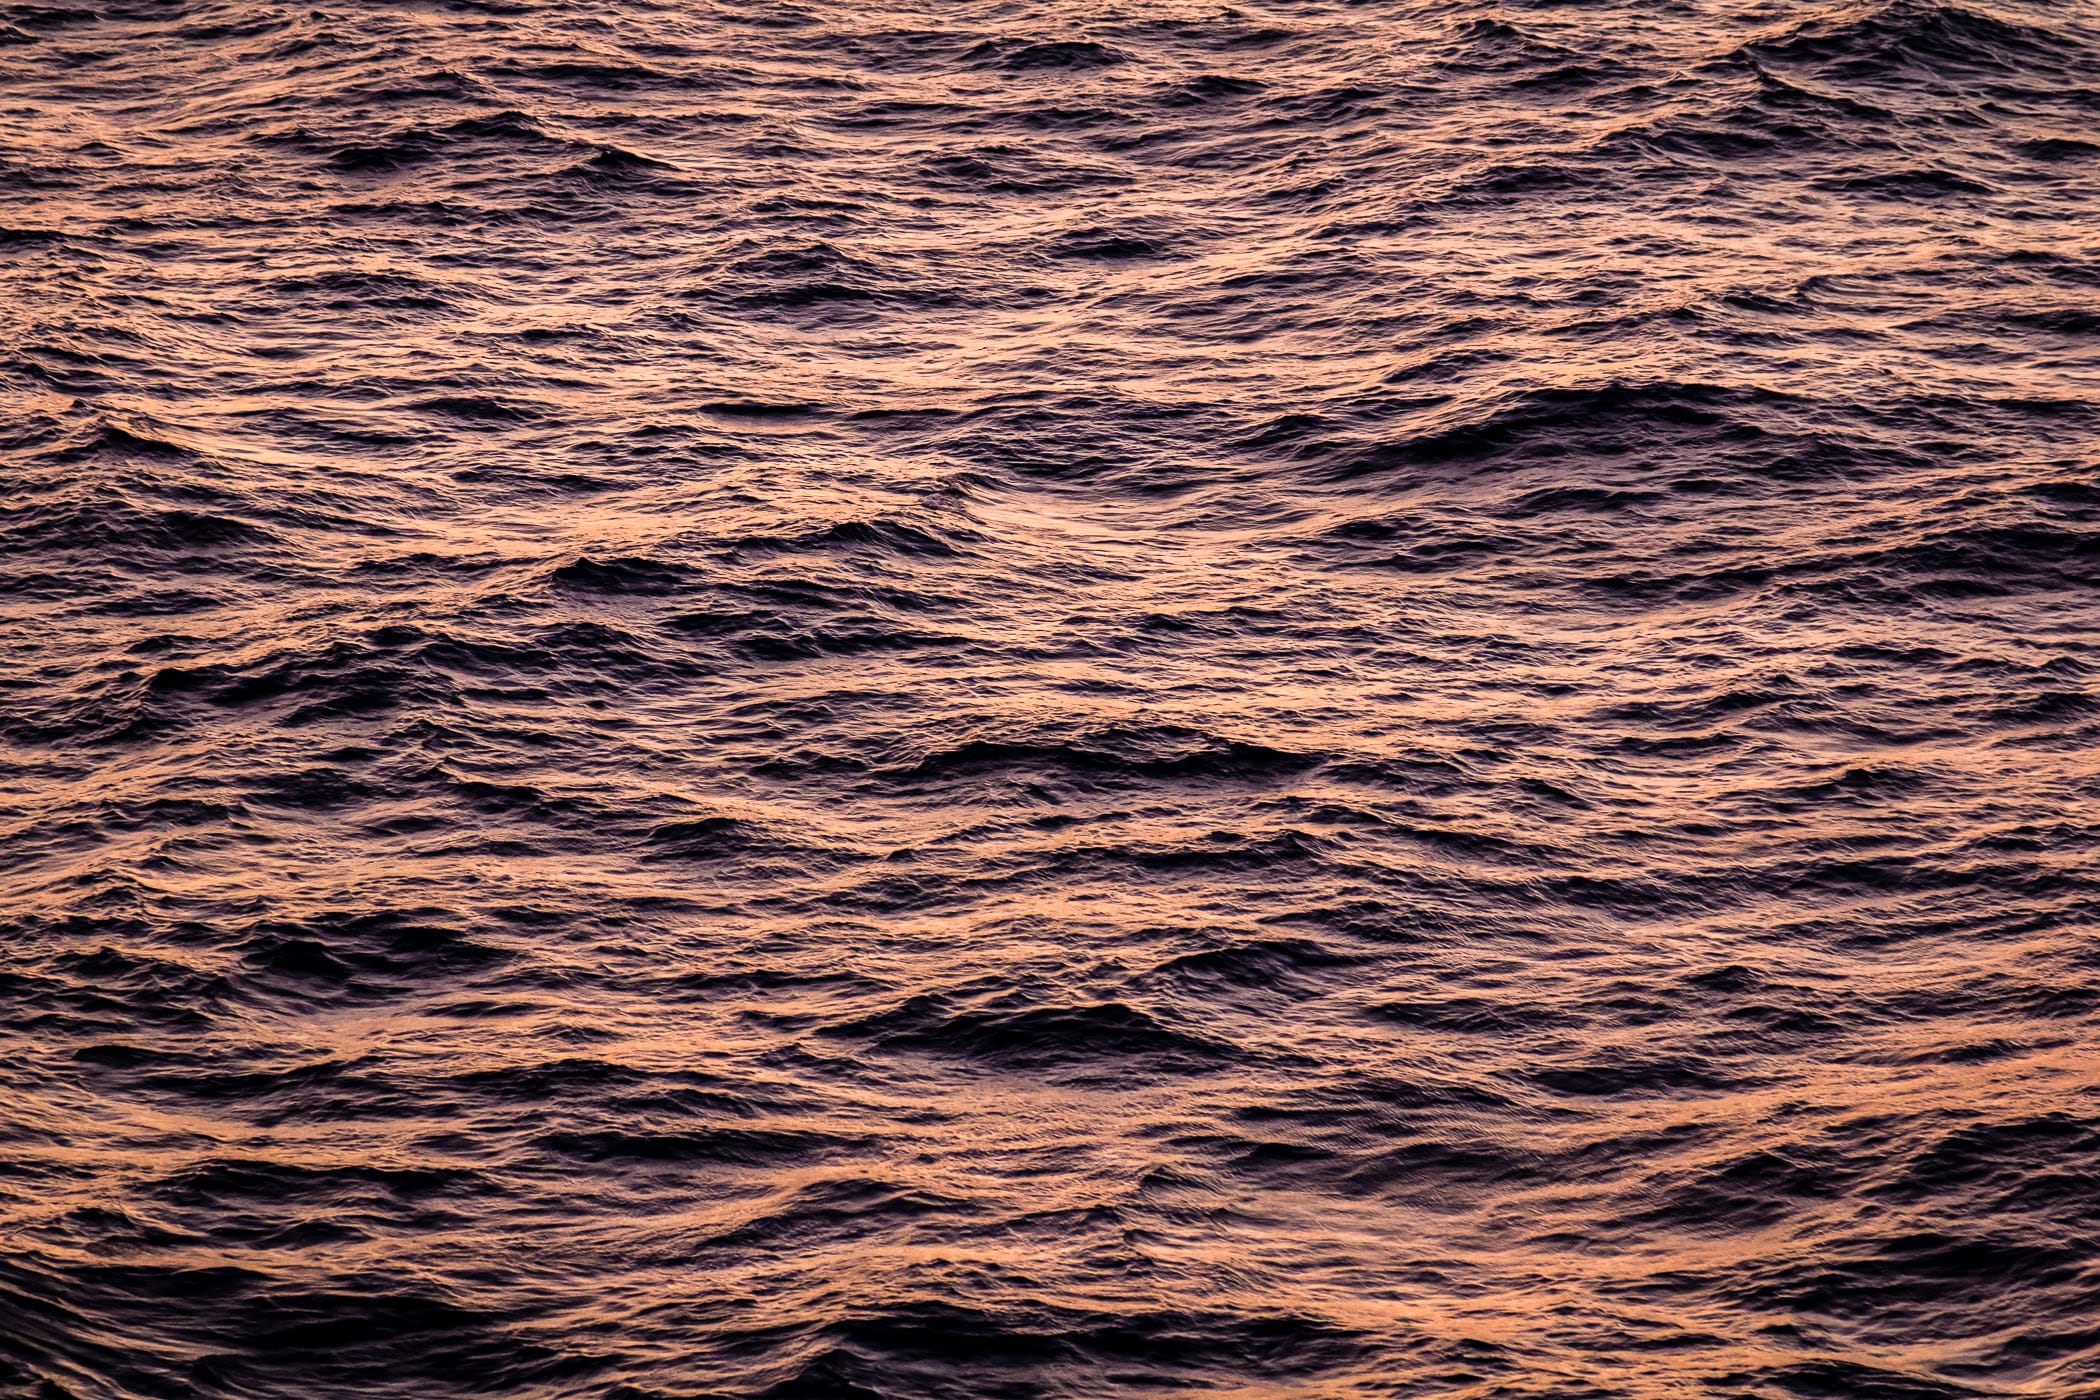 The Gulf of Mexico catches the early morning sunlight, highlighting its ever-changing surface as seen from the deck of the cruise ship Carnival Magic.